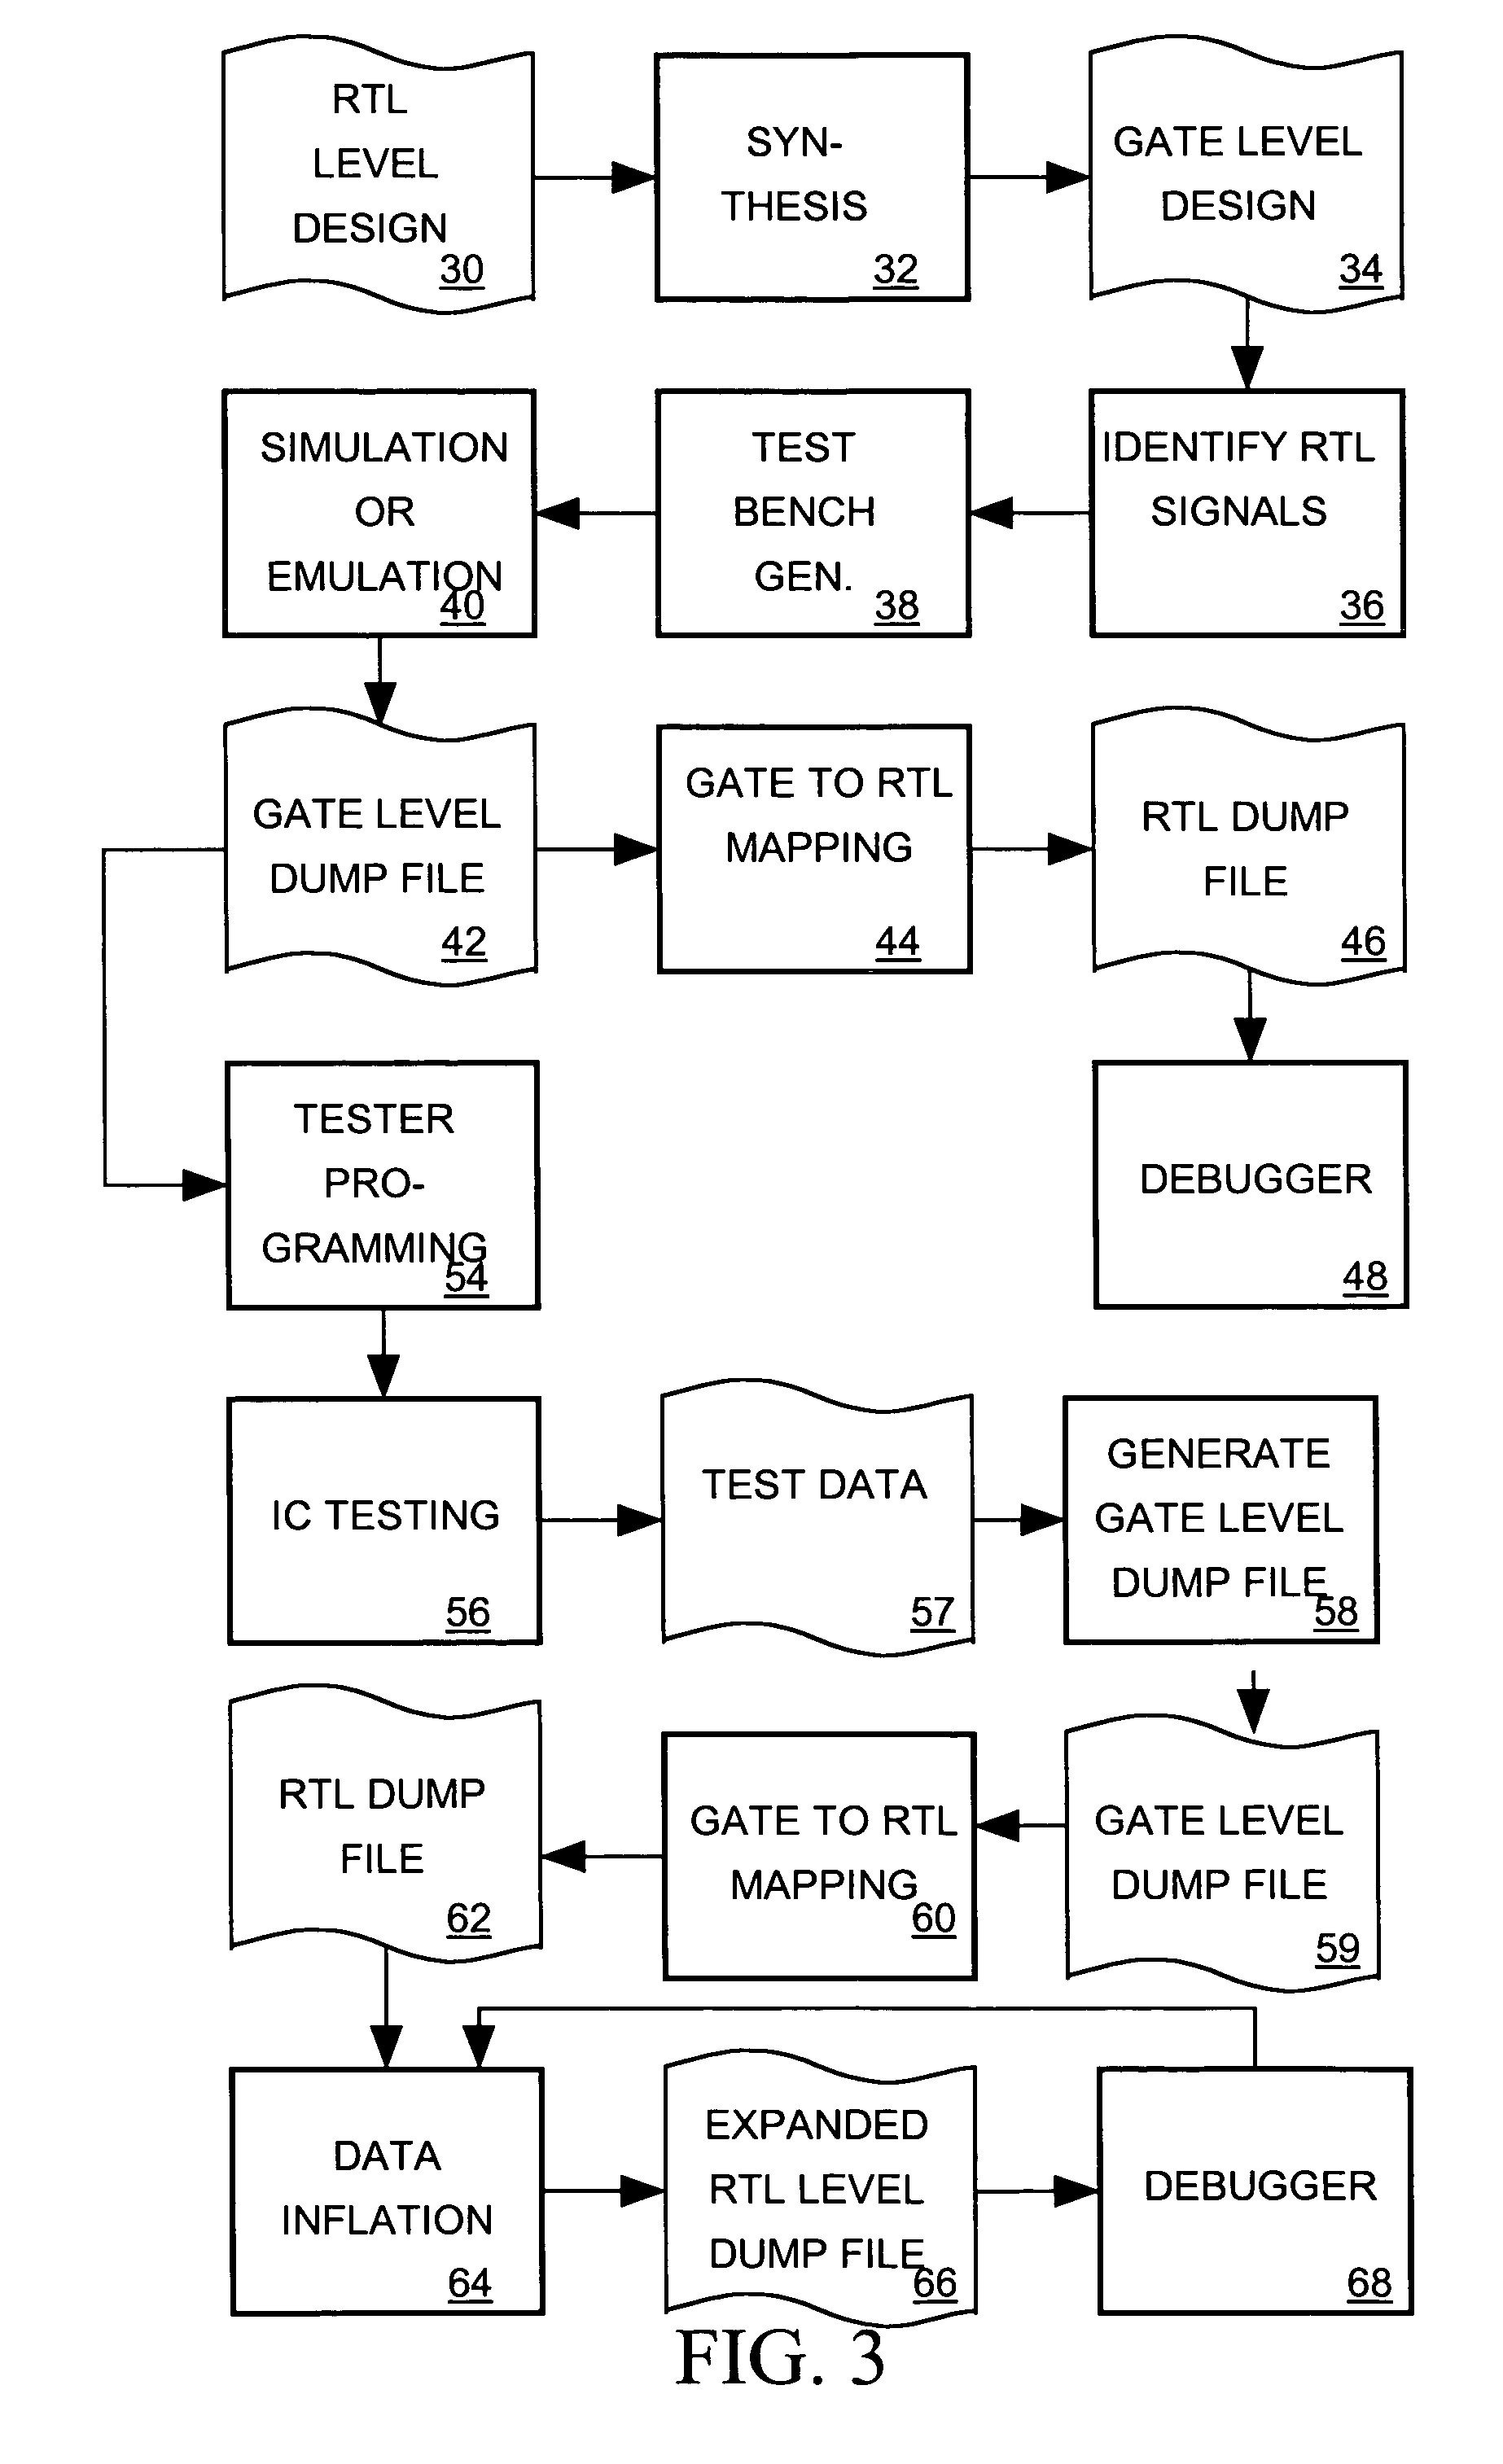 Debugging system for gate level IC designs